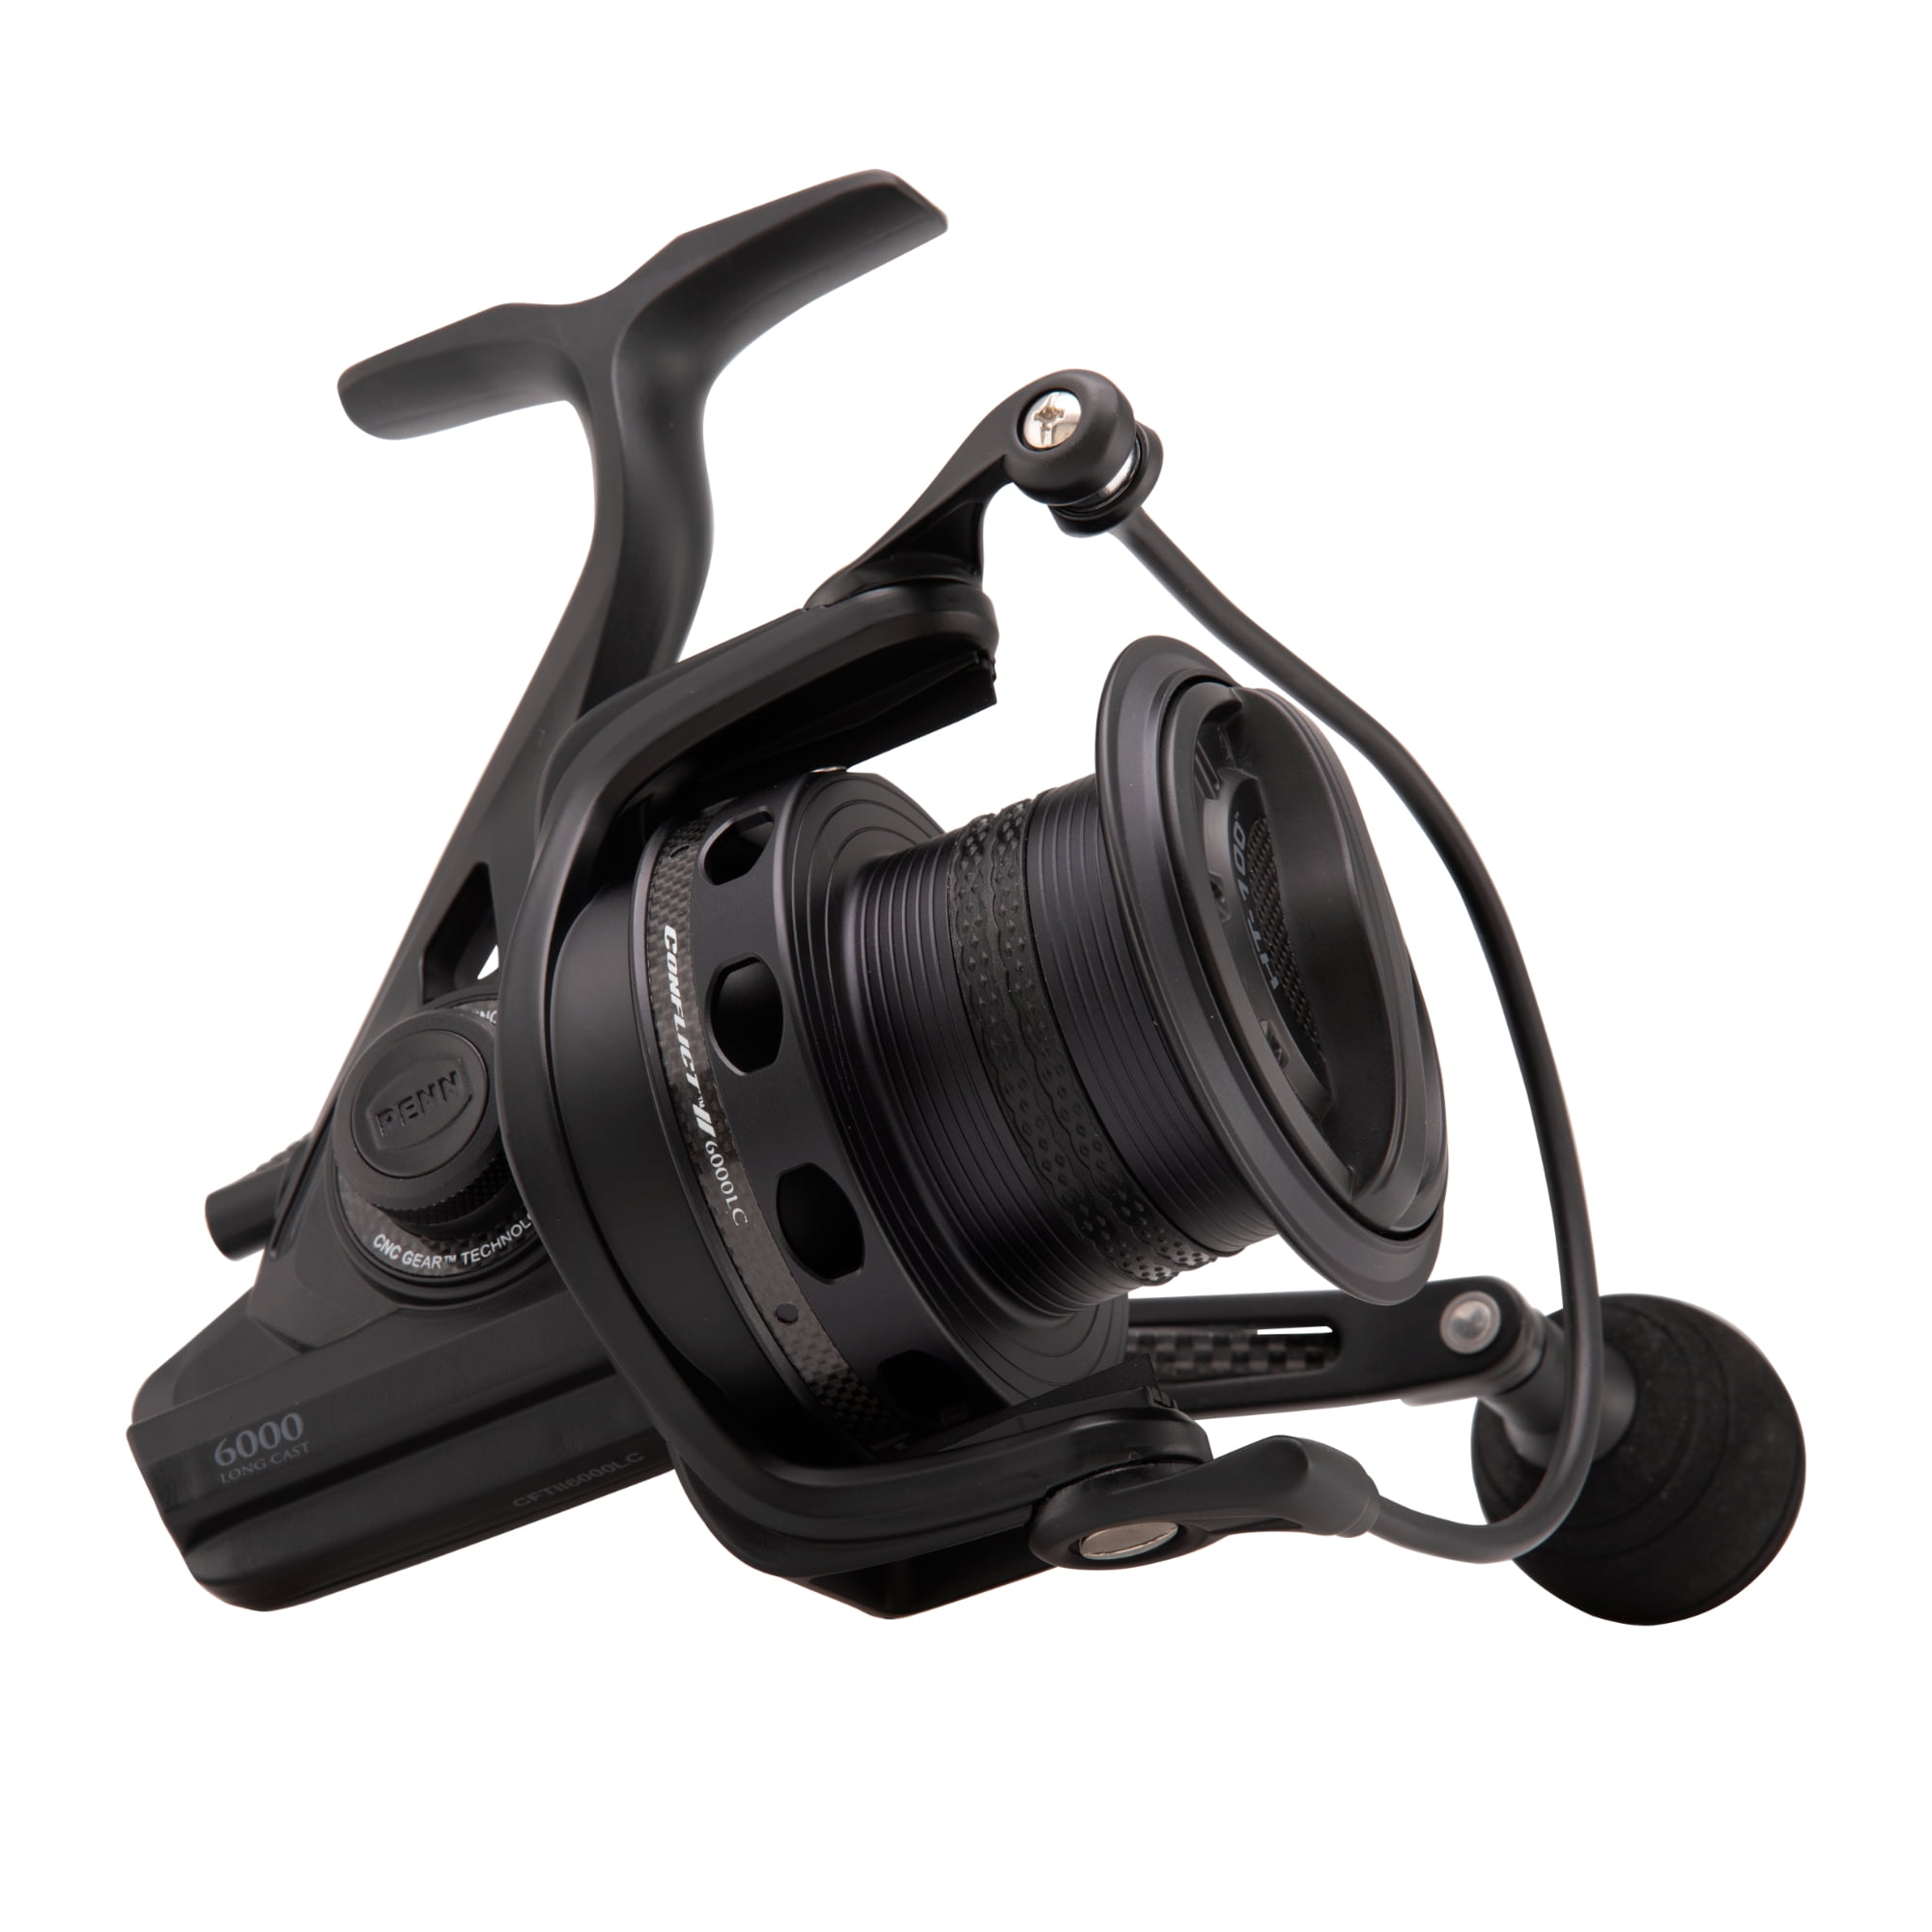 Penn Conflict II 5000 Conflict 2 CFTII5000 Fishing Spinning Reel